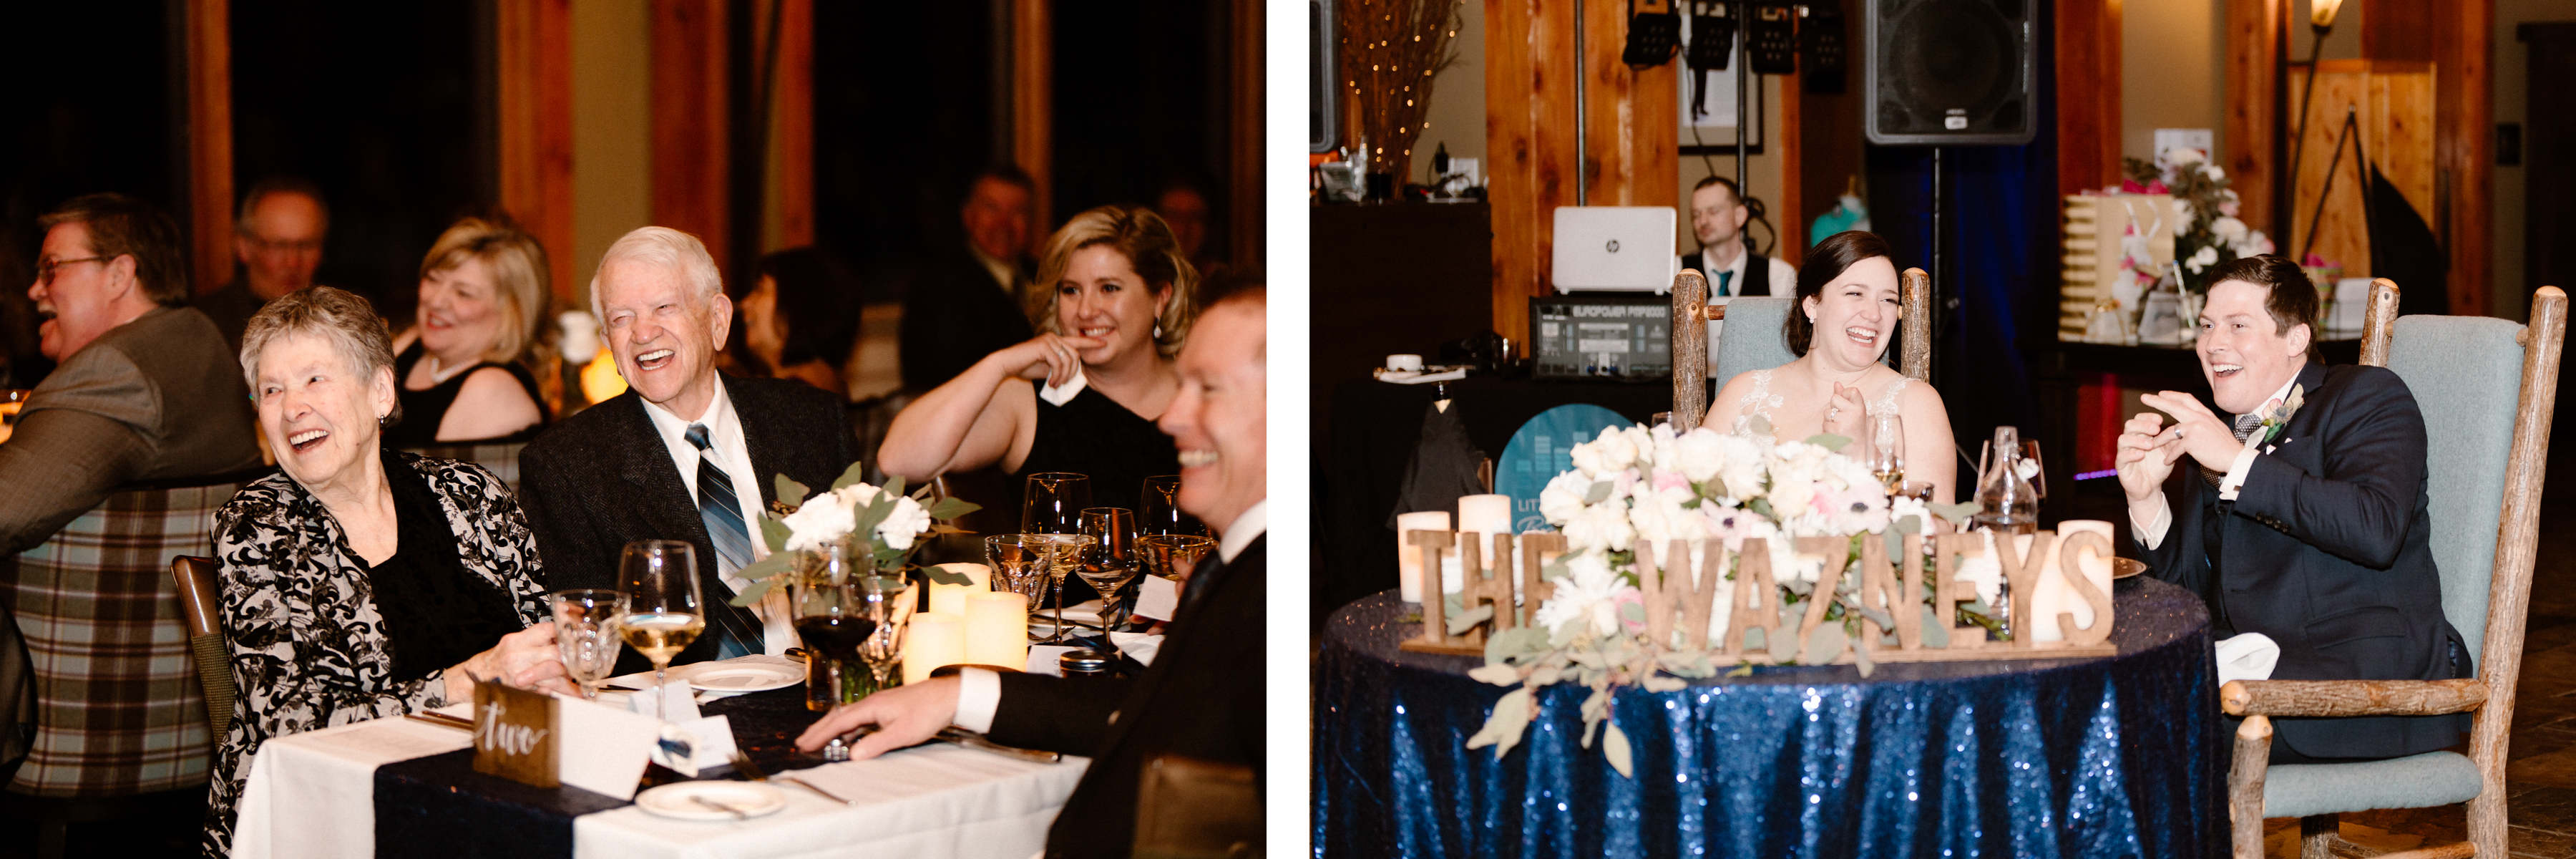 Invermere Wedding Photographers at Eagle Ranch and Panorama Ski Resort - Image 56